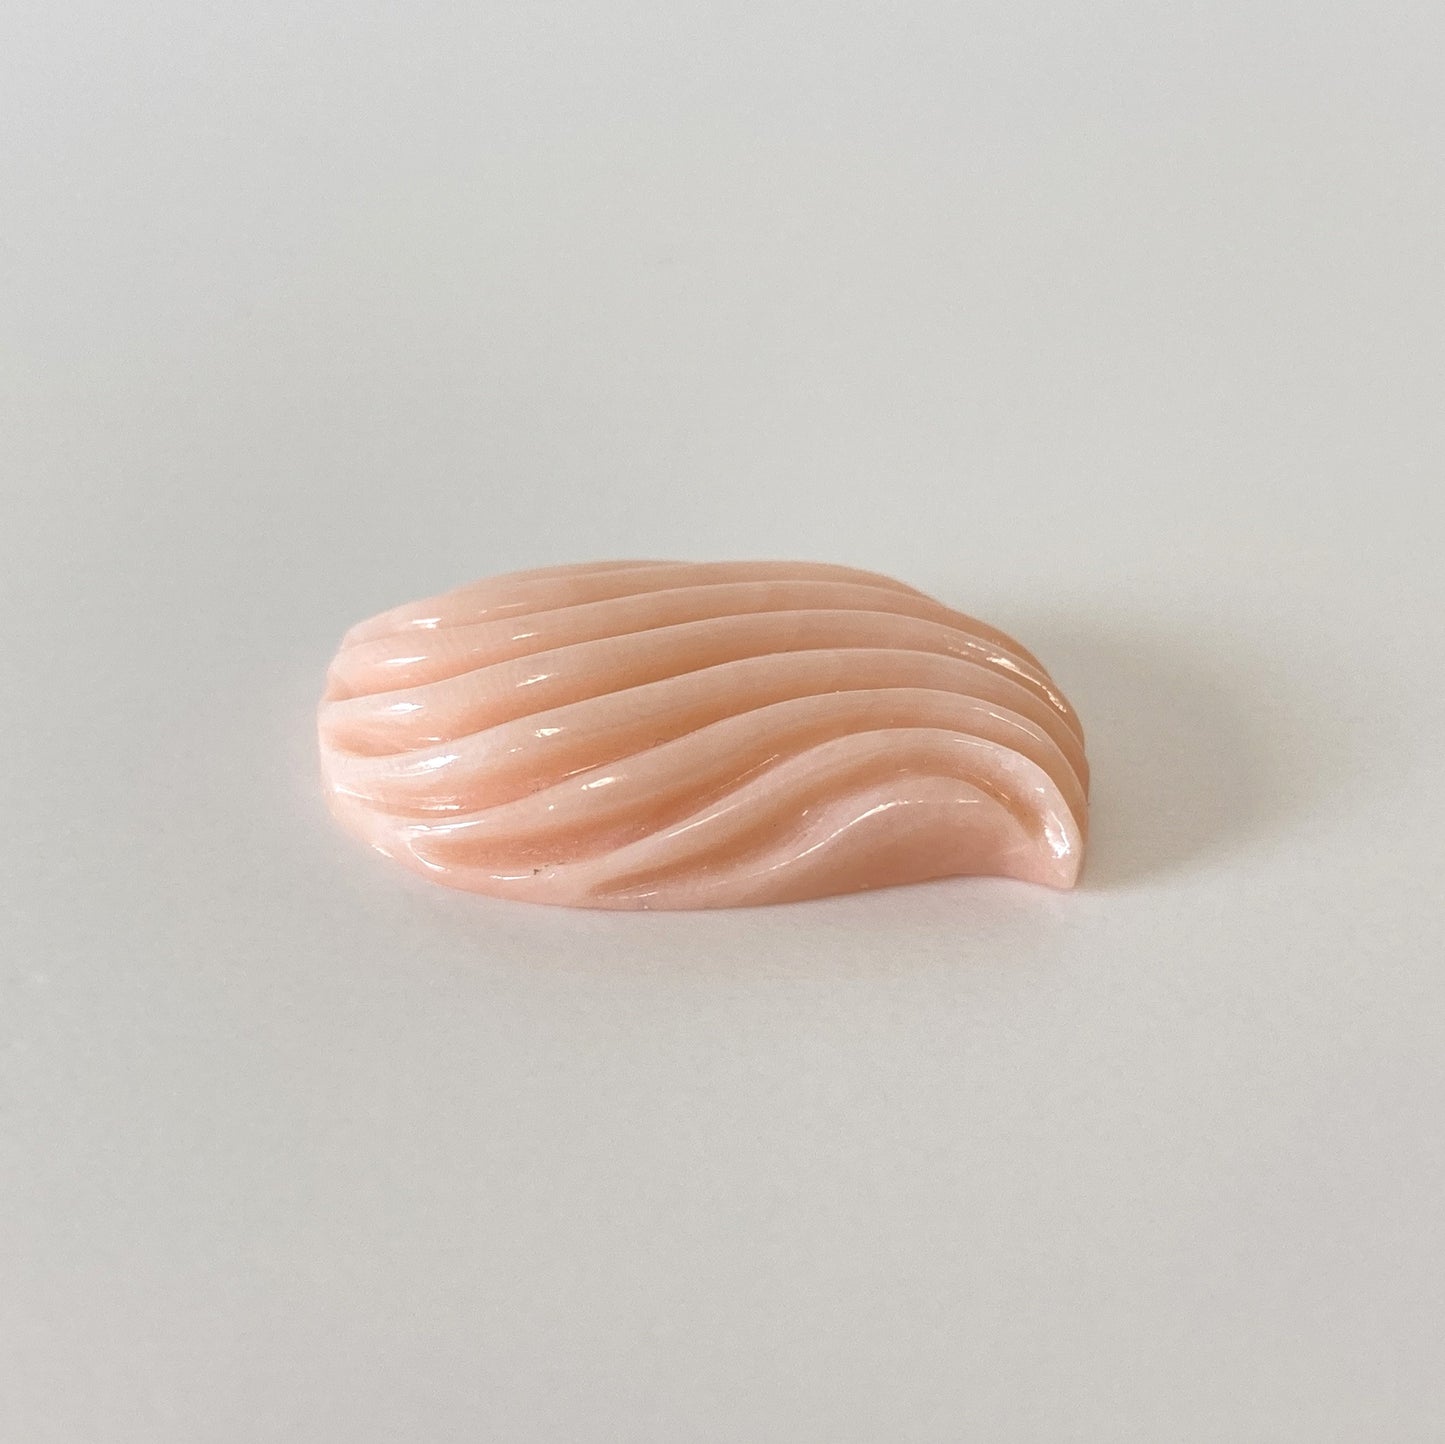 Pink angel skin coral loose, Hand Carved Unique shape Angel-skin color coral, Genuine Undyed Pink Coral for Jewelry making,24.4x16.9mm